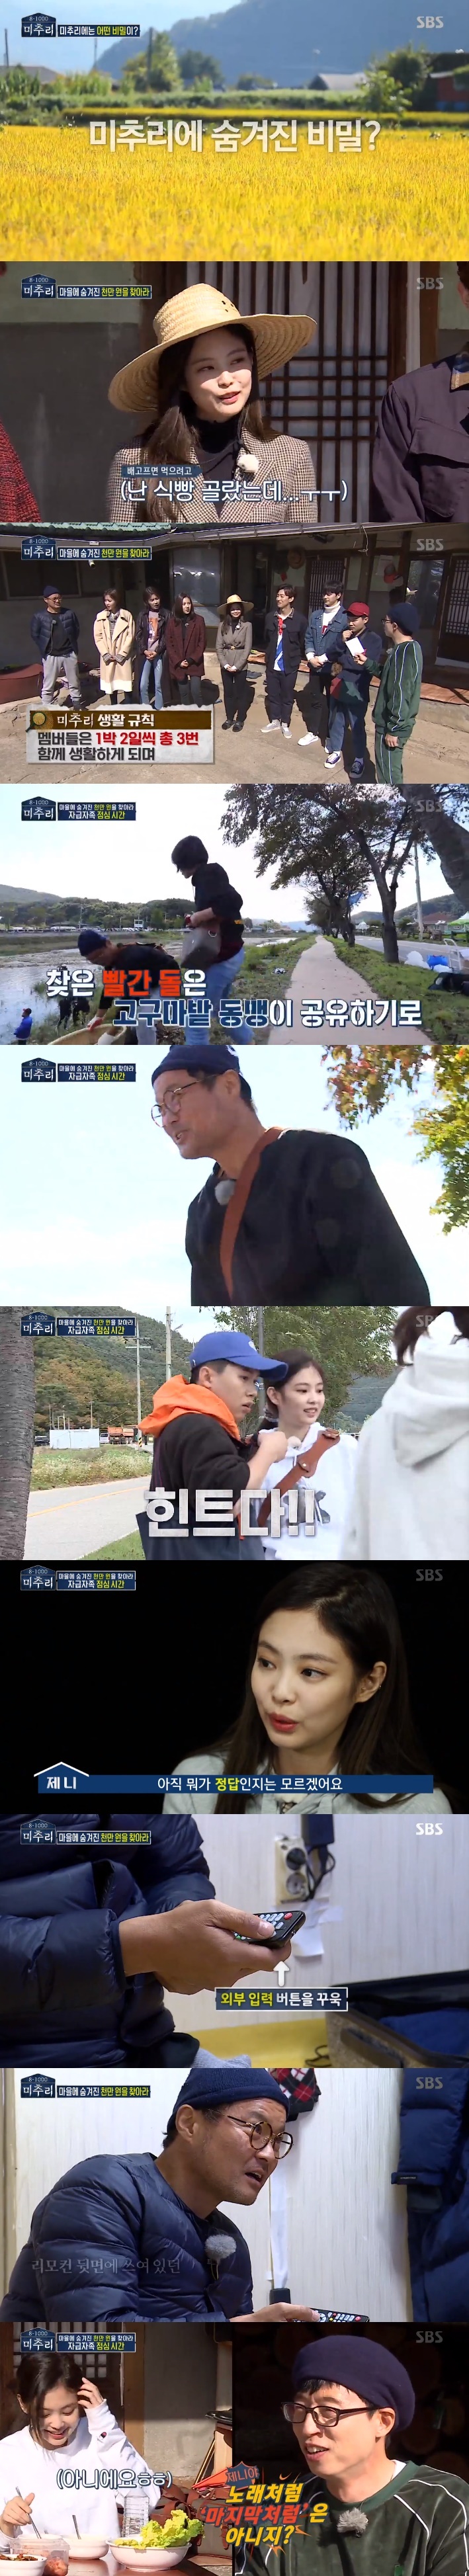 On SBS Michu and 8-1000, which was first broadcast at 11:20 pm on the 16th, members who entered Michu and were drawn.On this day, Yoo Jae-seok, Kim Sang-ho, Kang Ki-young, Im Soo-hyang, Jenny, Jang Do-yeon, Son Dam-bi and Yang Se-heeong appeared.Im Soo-hyang traveled in a car and explained, Do you know what Michu and meaning is: Mi is a beautiful autumn Chu village.The first to arrive, Yang Se-heeong, met Son Dam-bi, who arrived next; he said, Do you remember me?I used to drink at home, and Son Dam-bi was surprised to hear what he was talking about.Yang Se-heeong said, Like Kim Hee-chuls brother. Son Dam-bi only remembered and laughed. Then Jang Do-yeon appeared.Jang Do-yeon showed a close relationship with Son Dam-bi and added a smile by saying, We are close together with our program, this Sister anti-Comedian.Then, Actor Kang Ki-young captured Sight with a lot of luggage. Im going to the country. Ill show you a natural figure.Jenny of Black Pink then appeared, referring to Jenny in a pre-interview, Im worried that it will be a disaster because its the first time in the country.When Jenny appeared, Yang Se-heeong added a laugh as she spoke to stand next to him.Then, Actor Songgang appeared. Jang Do-yeon met him. Kang Ki-young added, Was it originally a meeting? I was hurt.Then, Actor Im Soo-hyang, Kim Sang-ho arrived.Kim Sang-ho answered Yang Se-heeongs question, I do not do it, I can not do it.Finally, Yoo Jae-seok, the head of Machuri who made the green look fashion, appeared. After the members release of the luggage, they began to learn about the secrets of Michu and.The other day, the members had chosen and been given the items they needed for their isolation: cassette tapes, hammers, ballpoint pens, bread, and so on.The members were not explained why they were gathered. Then, when all the members gathered, the crew played a video.The members were surprised to see that ten million won was hidden in Michu and the village. Yoo Jae-seok said, 8-1000 was revealed.I will meet three times a night and two days in total. I can cook only using ingredients in the village, including my grandmothers house. Then, in order to solve lunch with self-sufficiency, I decided to act by dividing the team. The first thing I found was Jang Do-yeon and Kim Sang-ho, who went along the road together.Kang found the same hint. Kang cheated the members of the fishing team naturally and broke the stone with a hammer that was his hint tool.There was a paper in the stone that only the elevator open button had been lit, but everyone was watching, and all the fishing teams had finally acquired the red stone.Yoo Jae-seok, Yang Se-heeong, Im Soo-heeng, and Jenny decided to go to the water and catch fish, but only two of them were caught.Jang Do-yeon and Son Dam-bi laughed at the Chinese cabbage on miso.Jenny baked bread and found evidence. Jenny analyzed the evidence, saying, I do not know if it is H.O.T or hot.Kim Sang-ho said, Its delicious to eat sweet potato noodles, but said, I saw you doing it next to me. The members were embarrassed. Im Soo-hyang tried kimchi.The members then played game volleyball to acquire hint tools.Kim Sang-ho found the phrase D:1 written on the back of the remote, with the hint of april that he turned on the TV with the remote.As a result, the hints were open buttons, HOT and april.